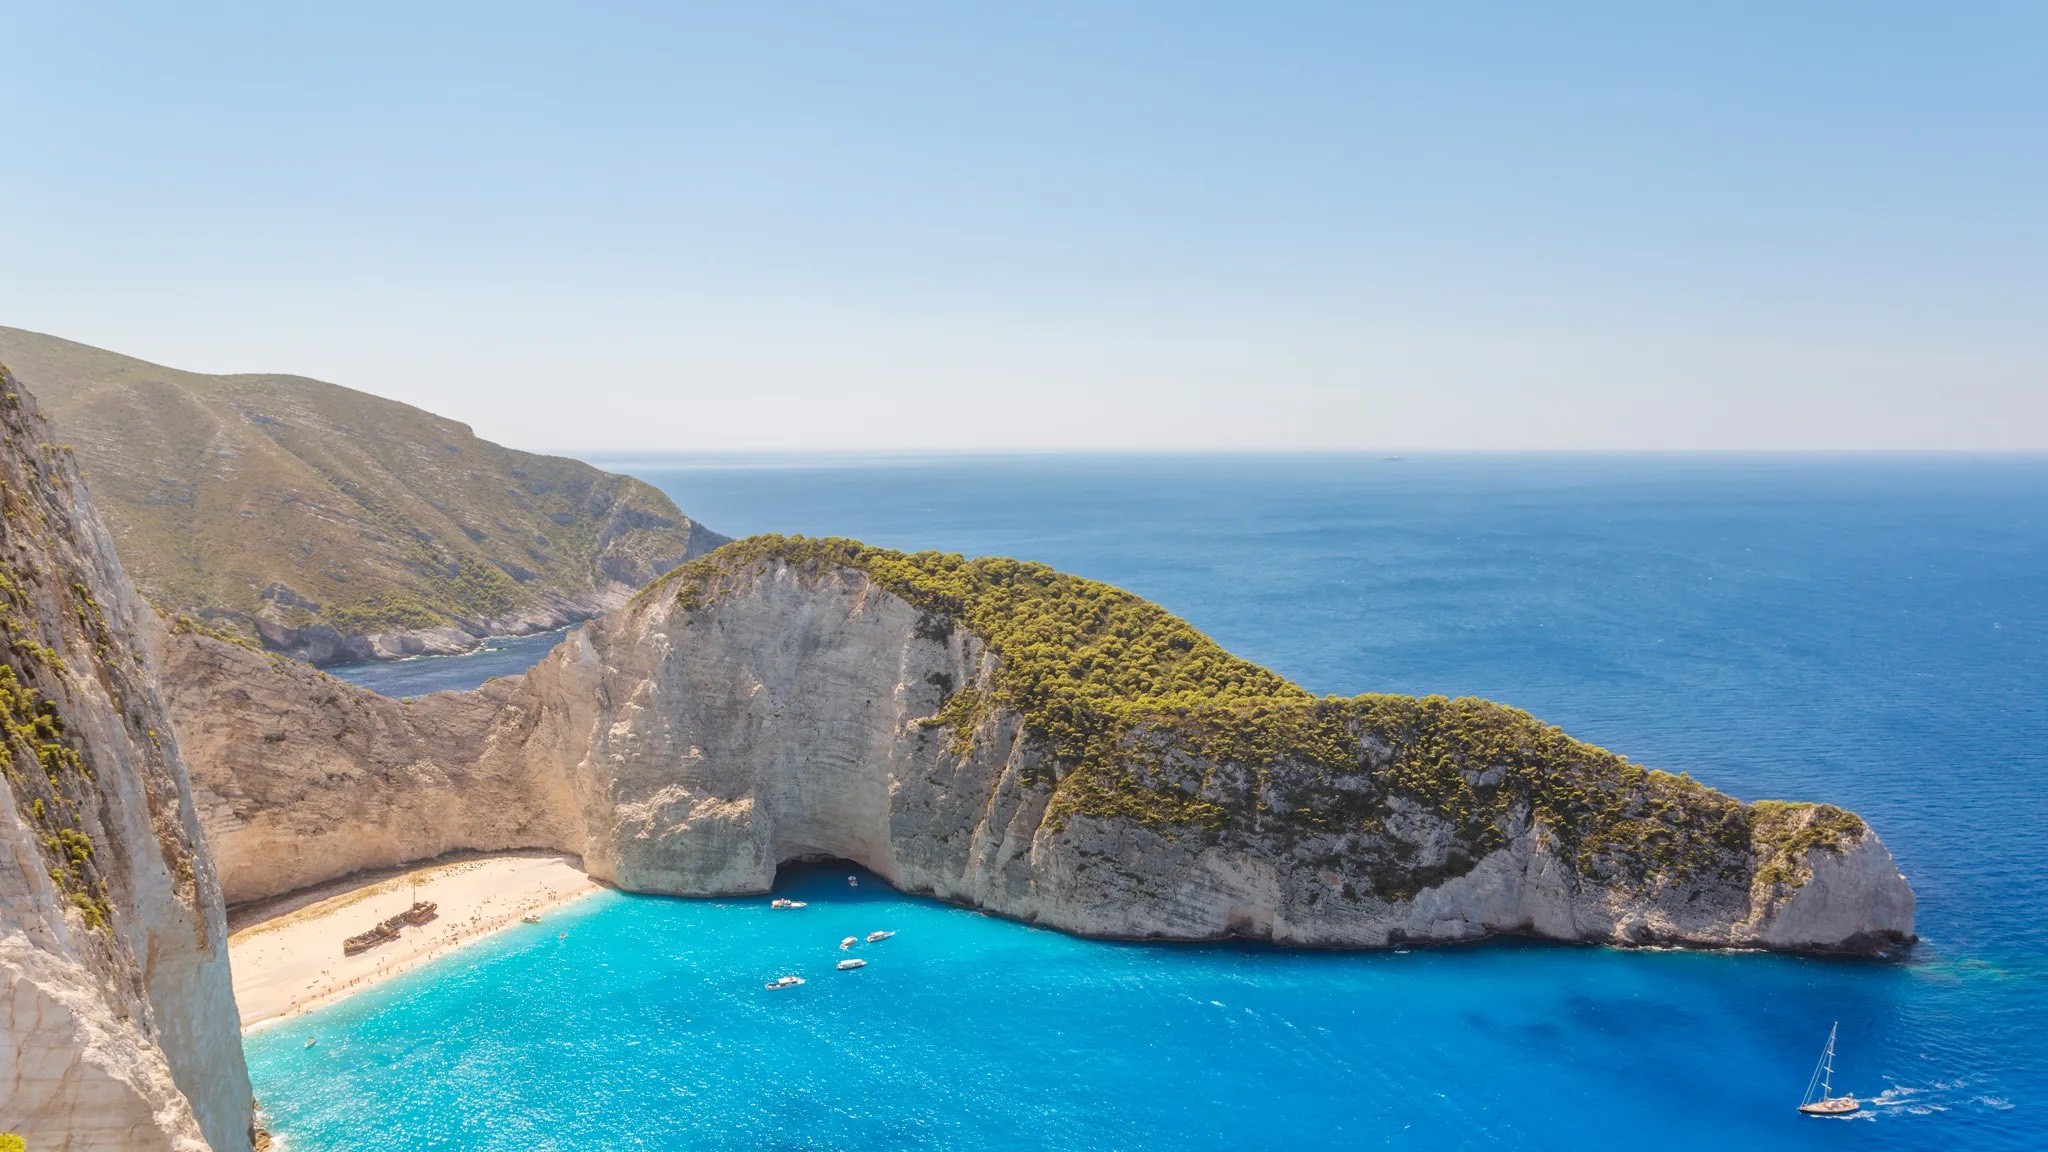 Navagio Beach, Zakynthos - one of the most beautiful stretches of beaches in Greece. Anyone else happy to have this on their doorstep? 